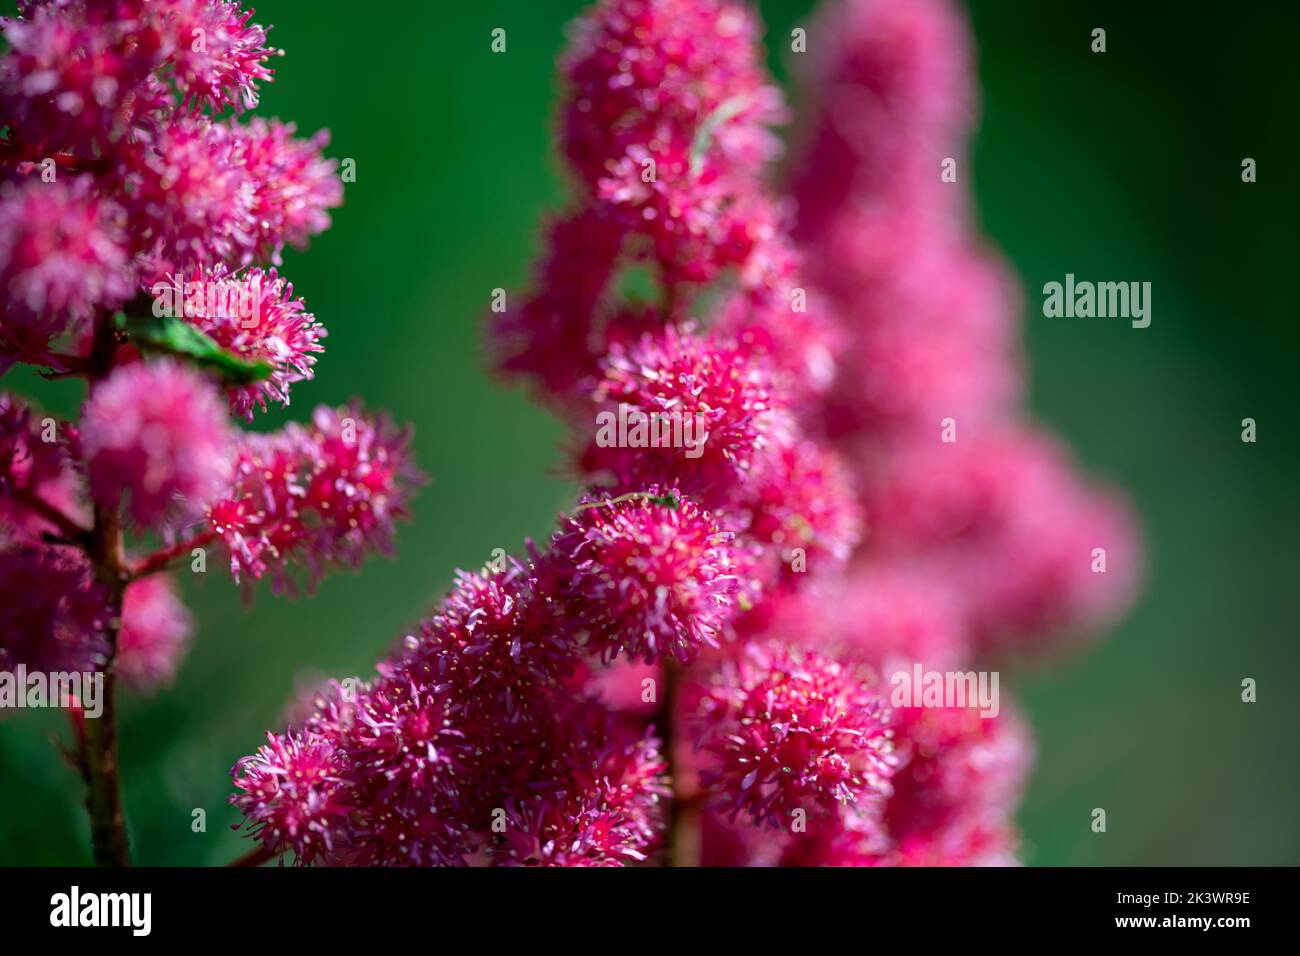 Astilbe flowers. Blooming summer flowers in garden. Pink Astilbe flowers background on green close up (macro). Floral wallpaper with flowers astilbe t Stock Photo